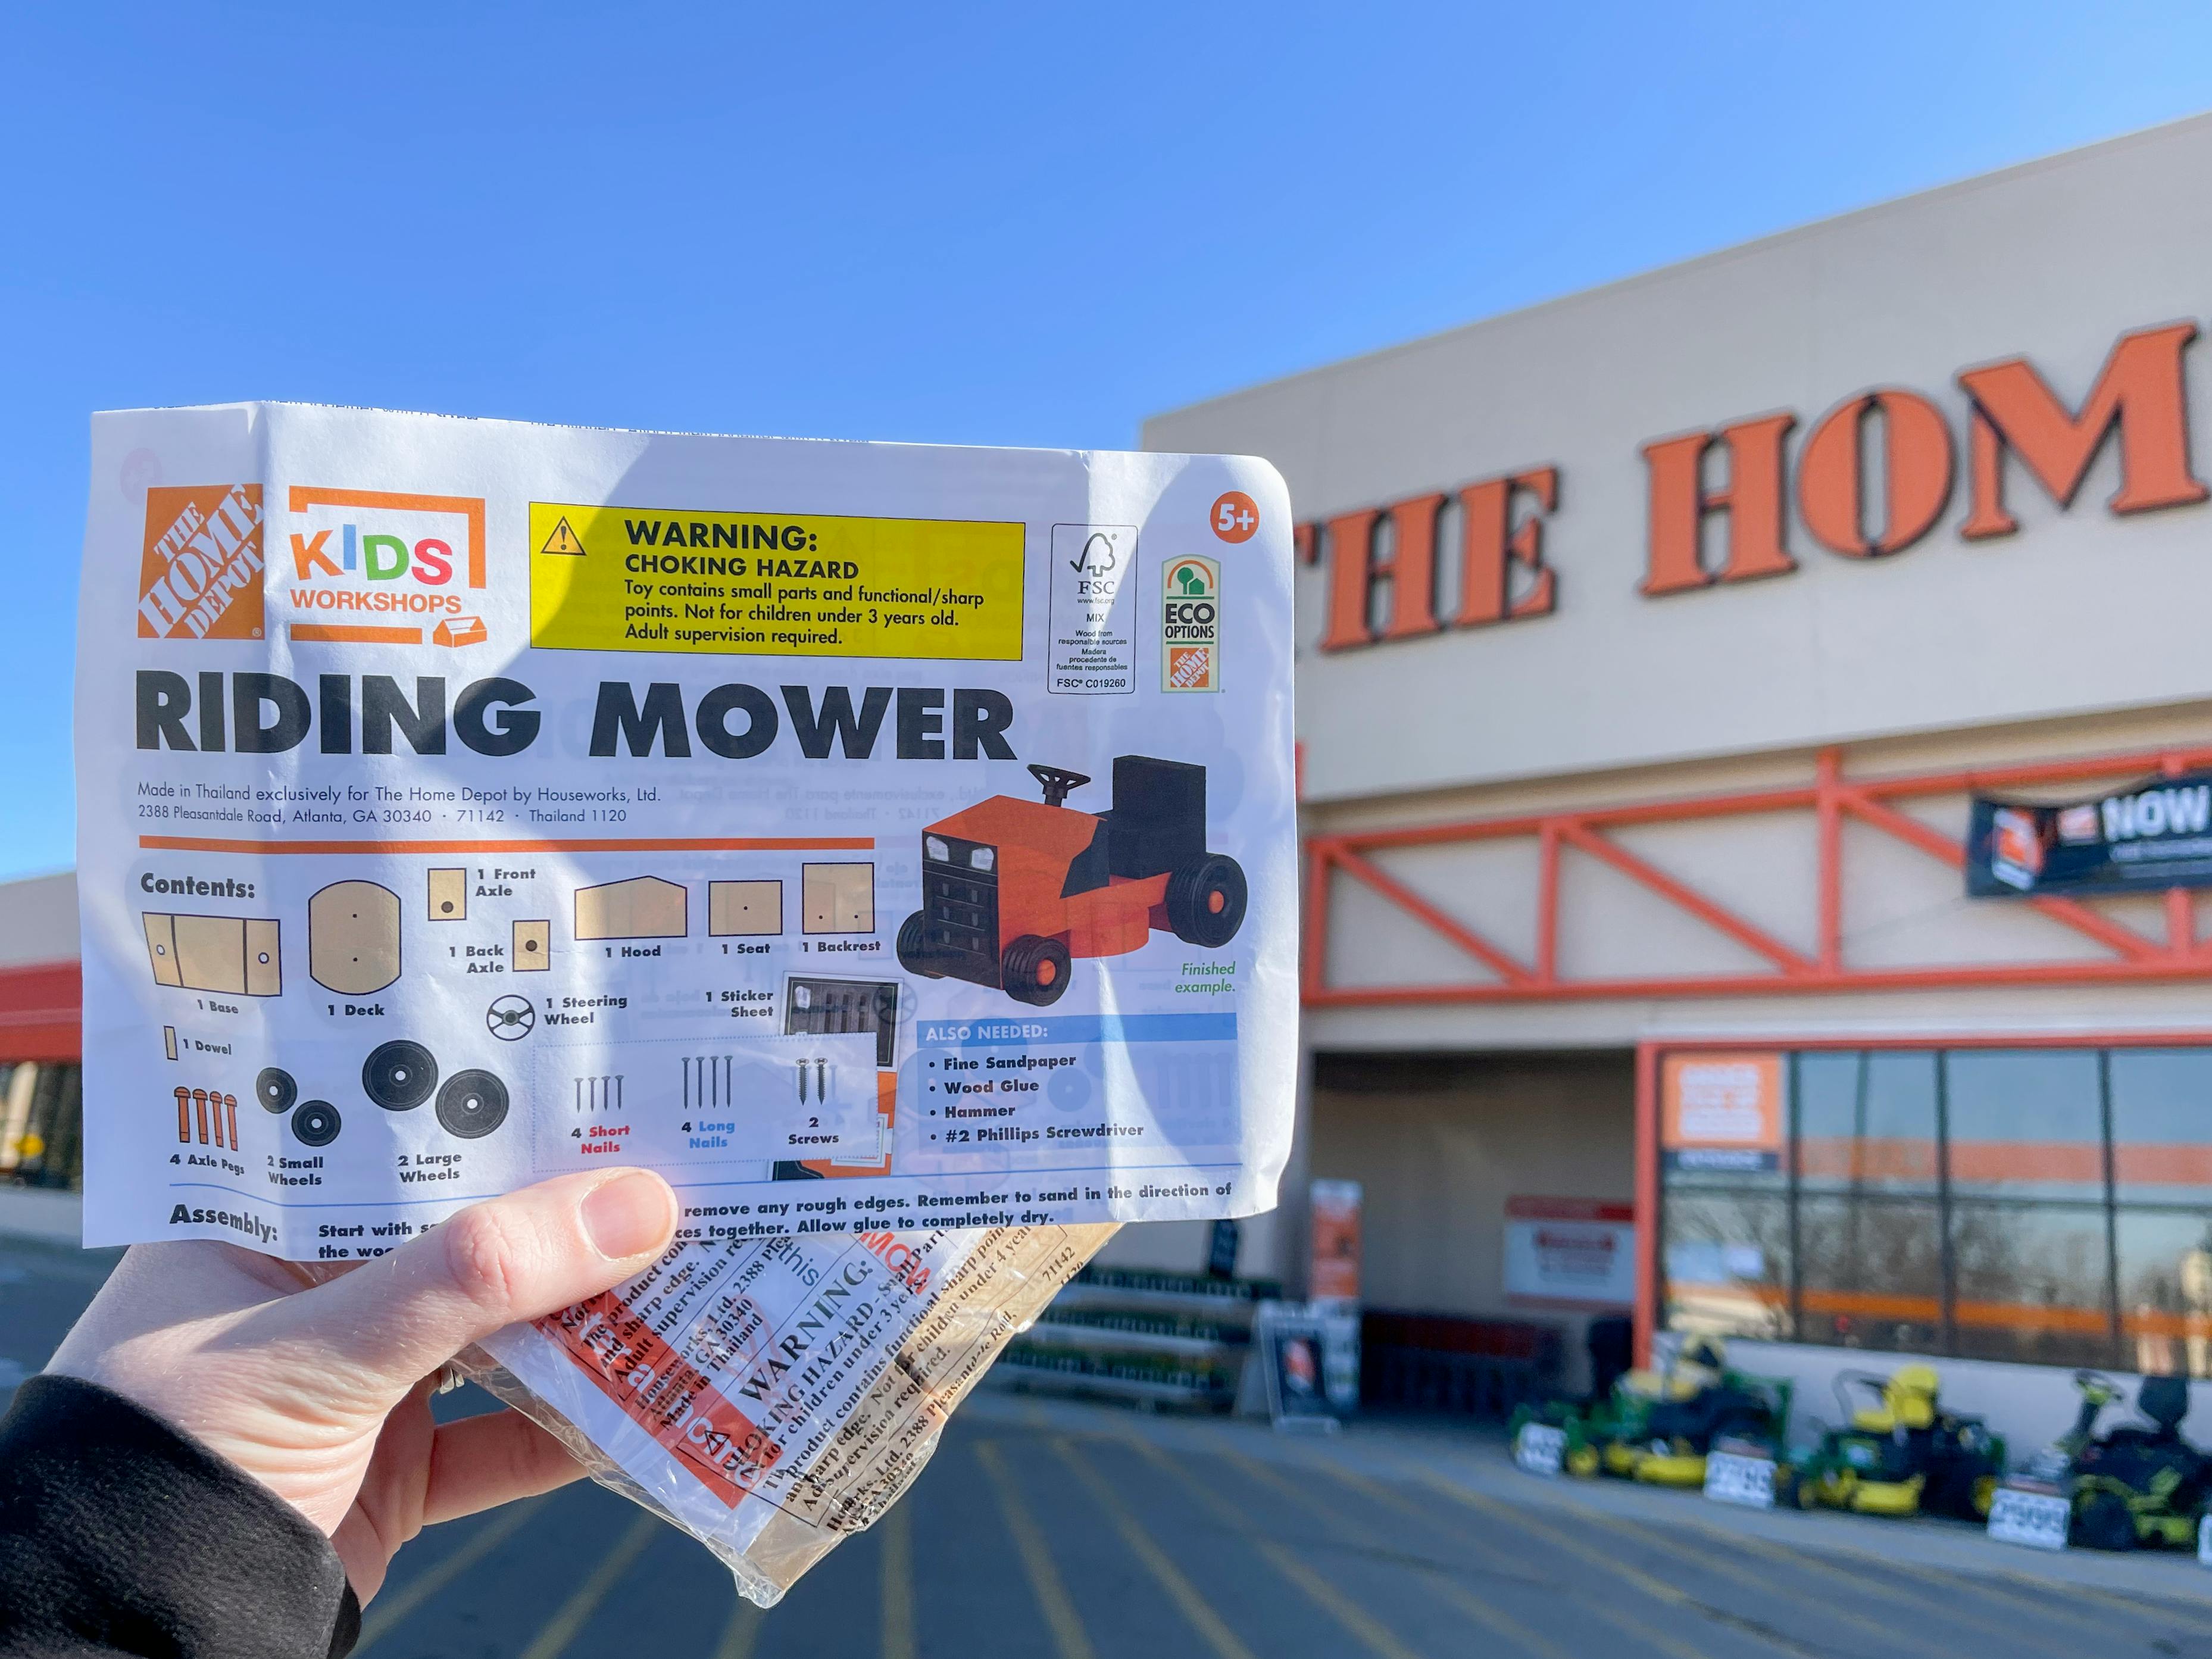 A Home Depot Kids Workshops Riding Mower kit held in front of the store